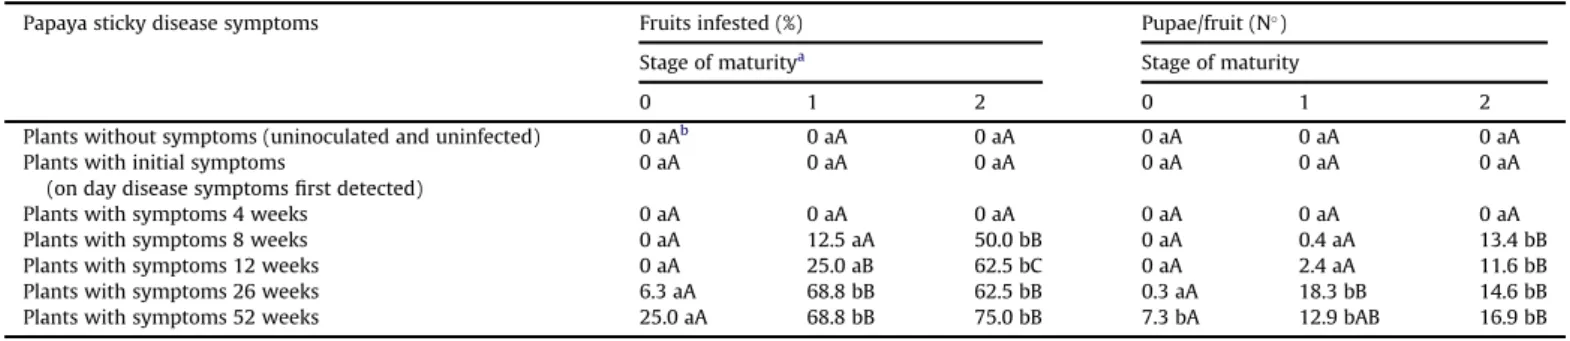 Fig. 1. Infestation of Ceratitis capitata (Diptera: Tephritidae) in papaya fruits in three stages of maturity (0, 1, 2) and graphical representation of the development of the symptoms of sticky disease in papaya plants showing the security of fruit free of